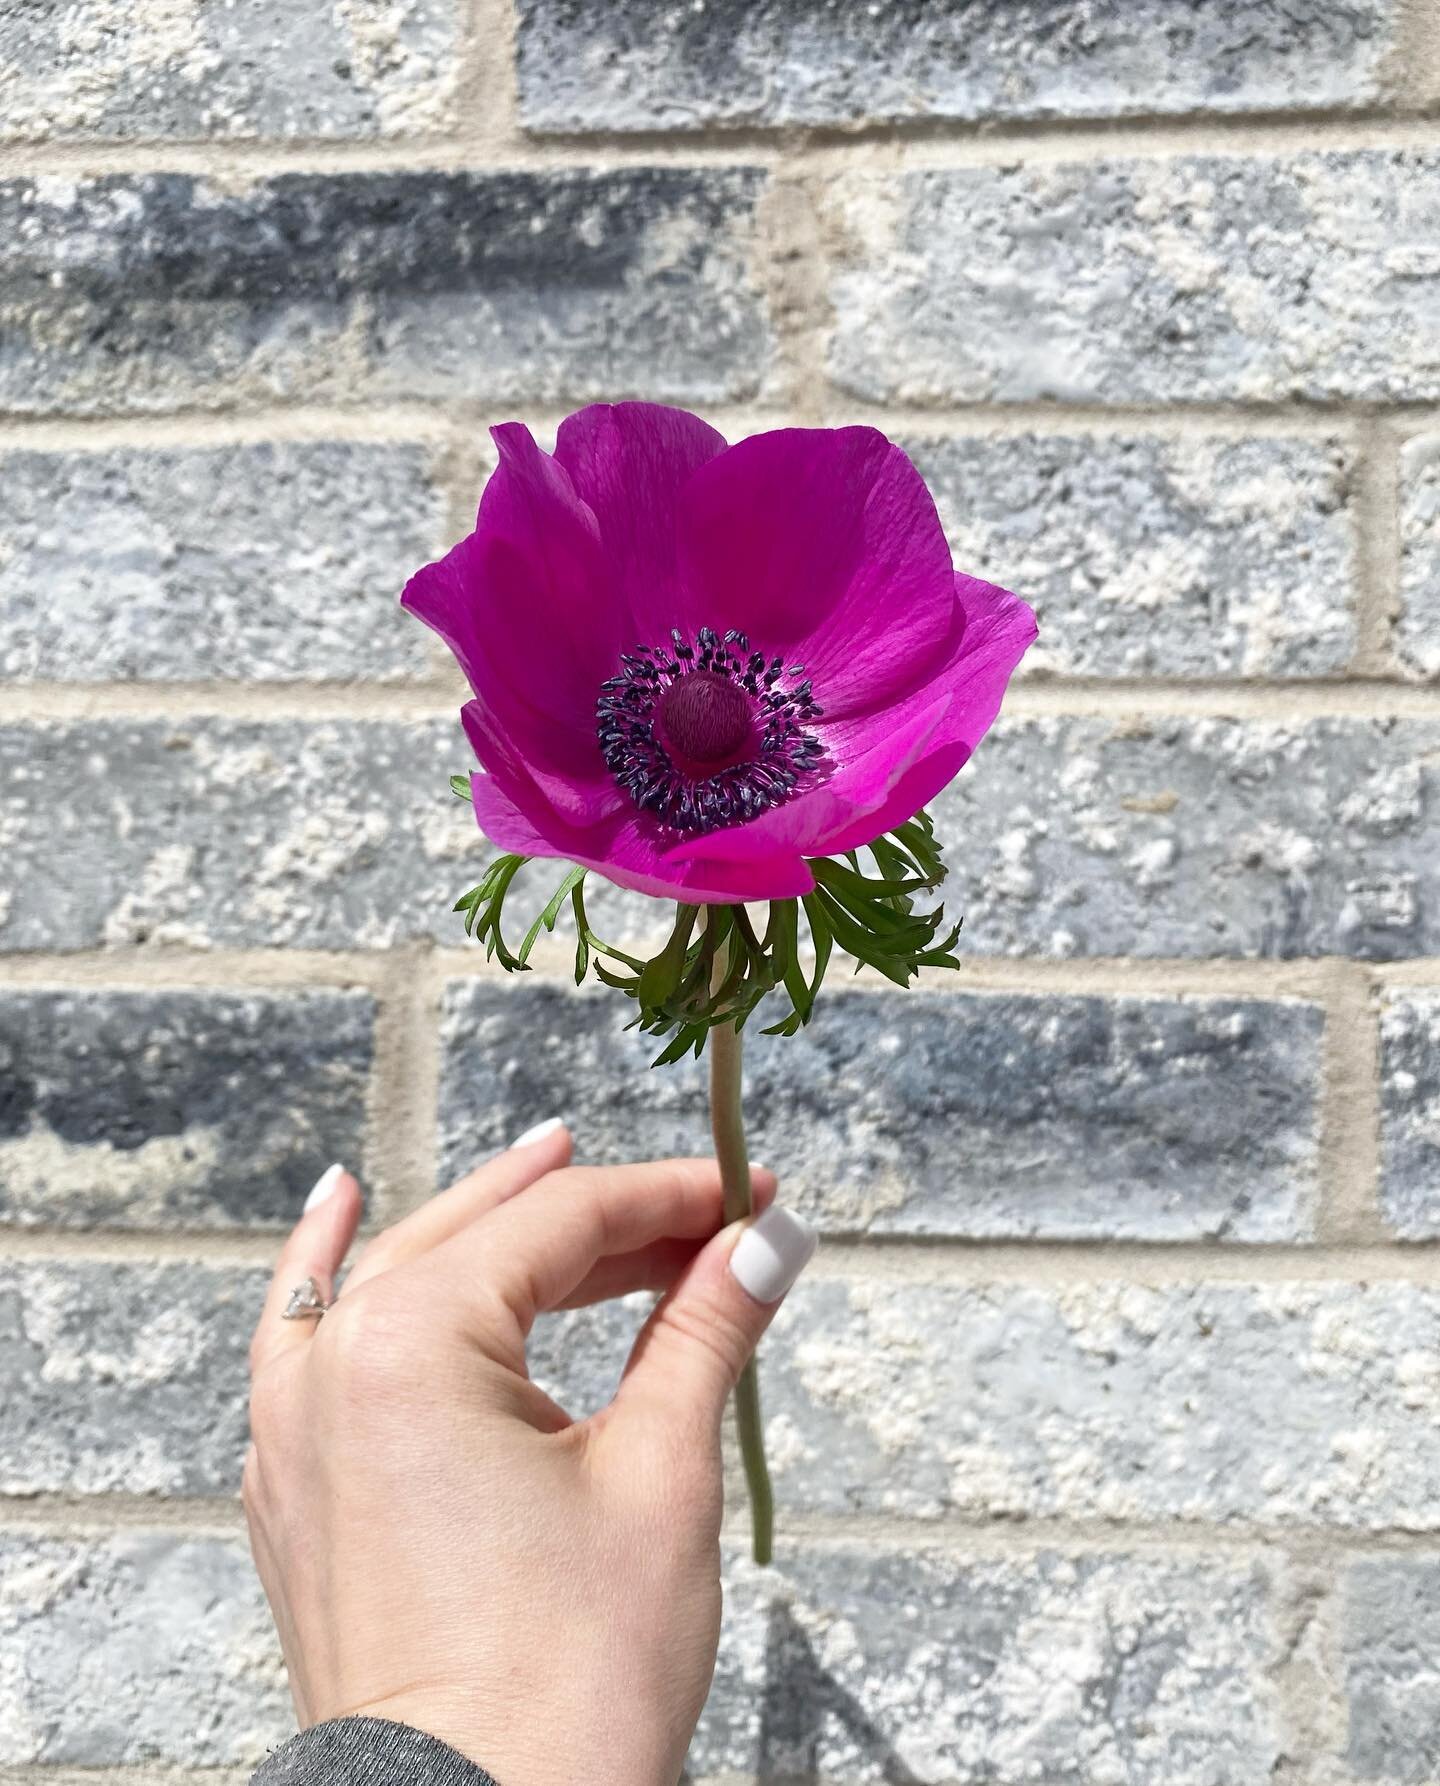 First anemone bloom of the year, and it has my heart feeling all the spring garden excitement. 🥰🌱 My mom @tleland77  donated some anemone corms from her garden in Missouri so I could try growing them here in Texas! I pre sprouted these little plant